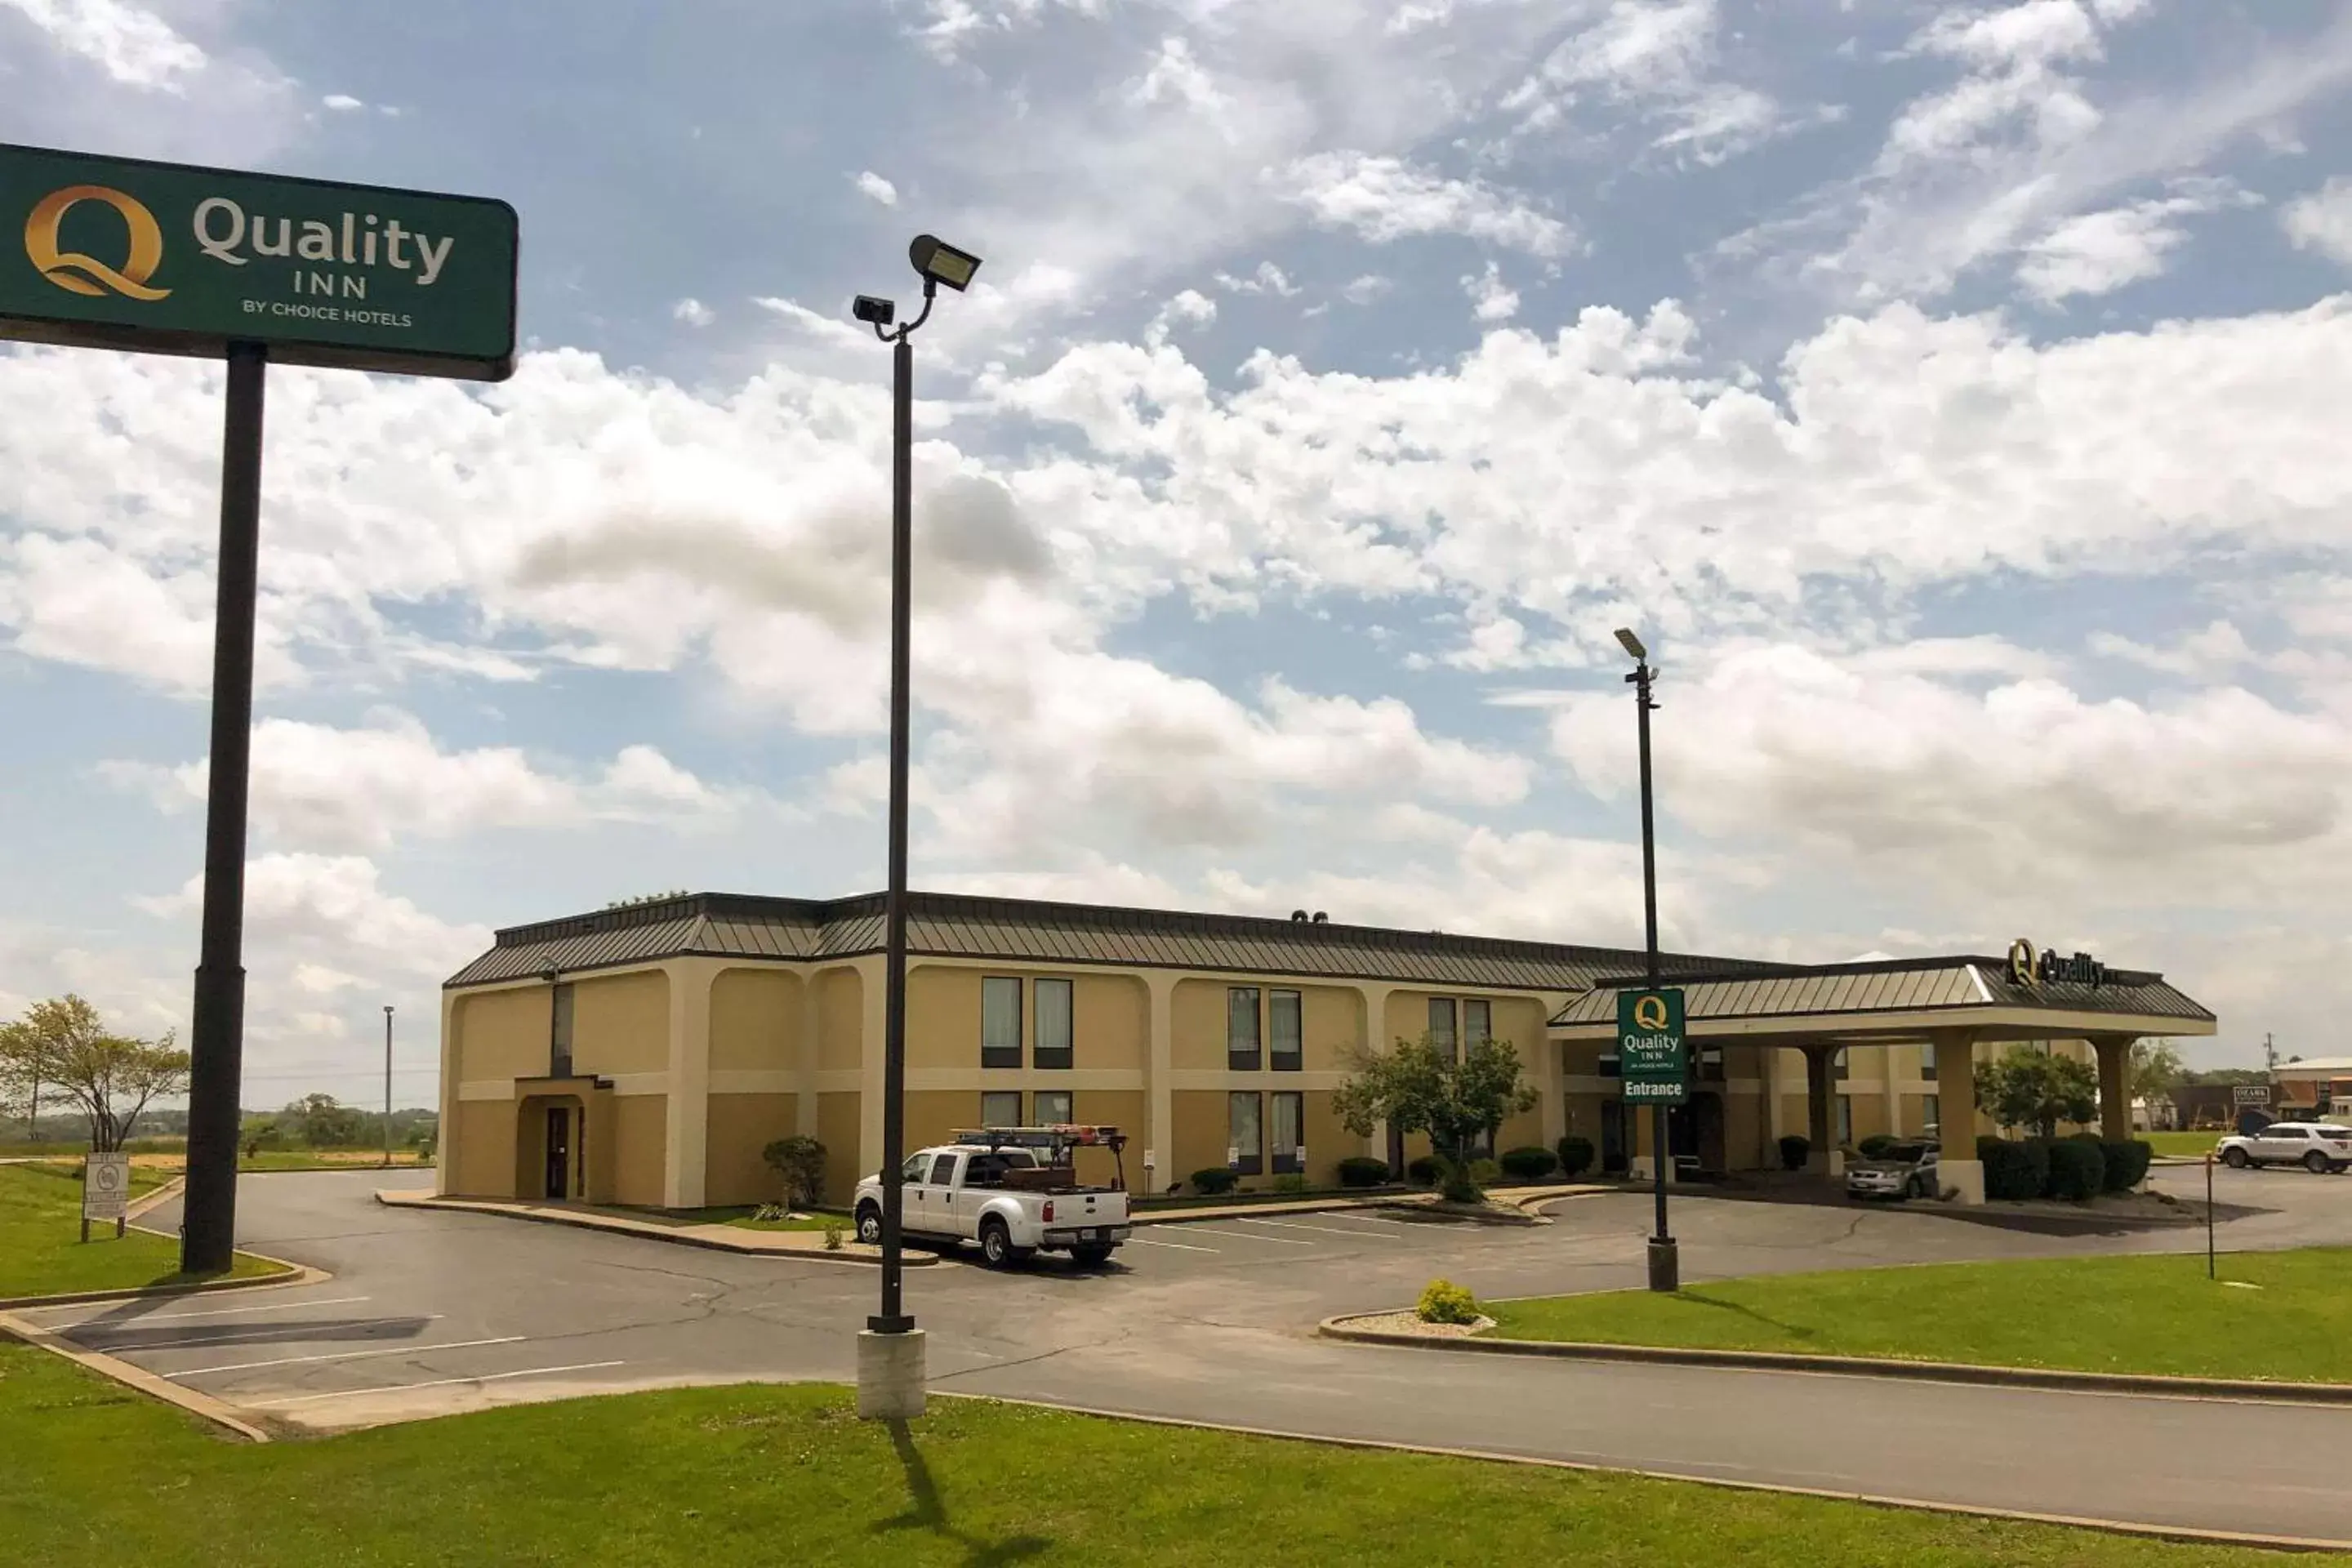 Property Building in Quality Inn Perryville